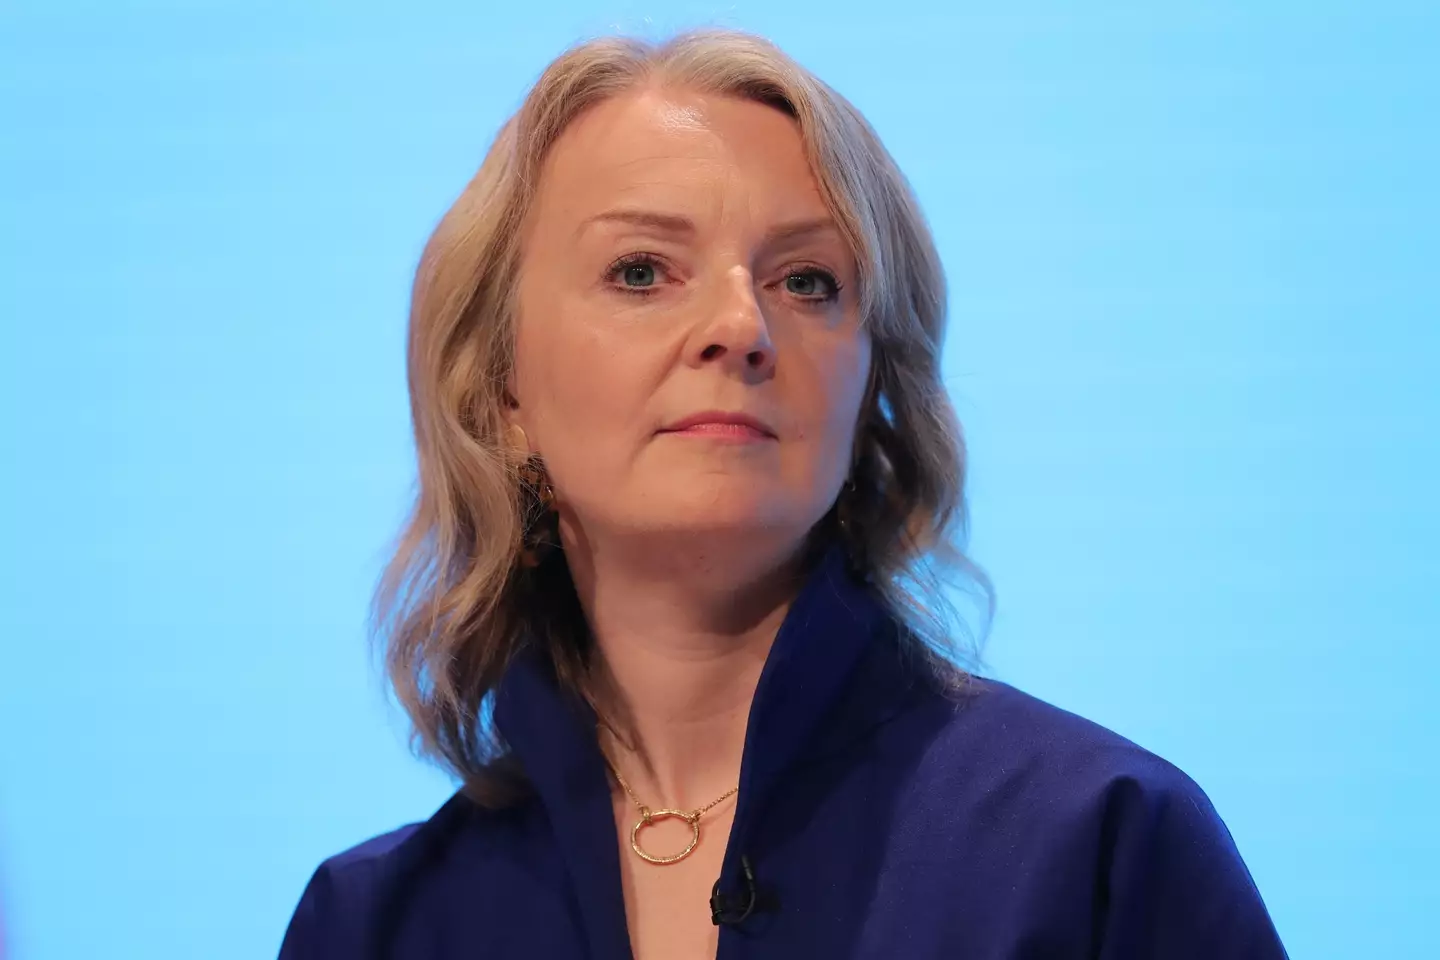 Liz Truss has been announced as the new prime minister, following a six-week leadership campaign.